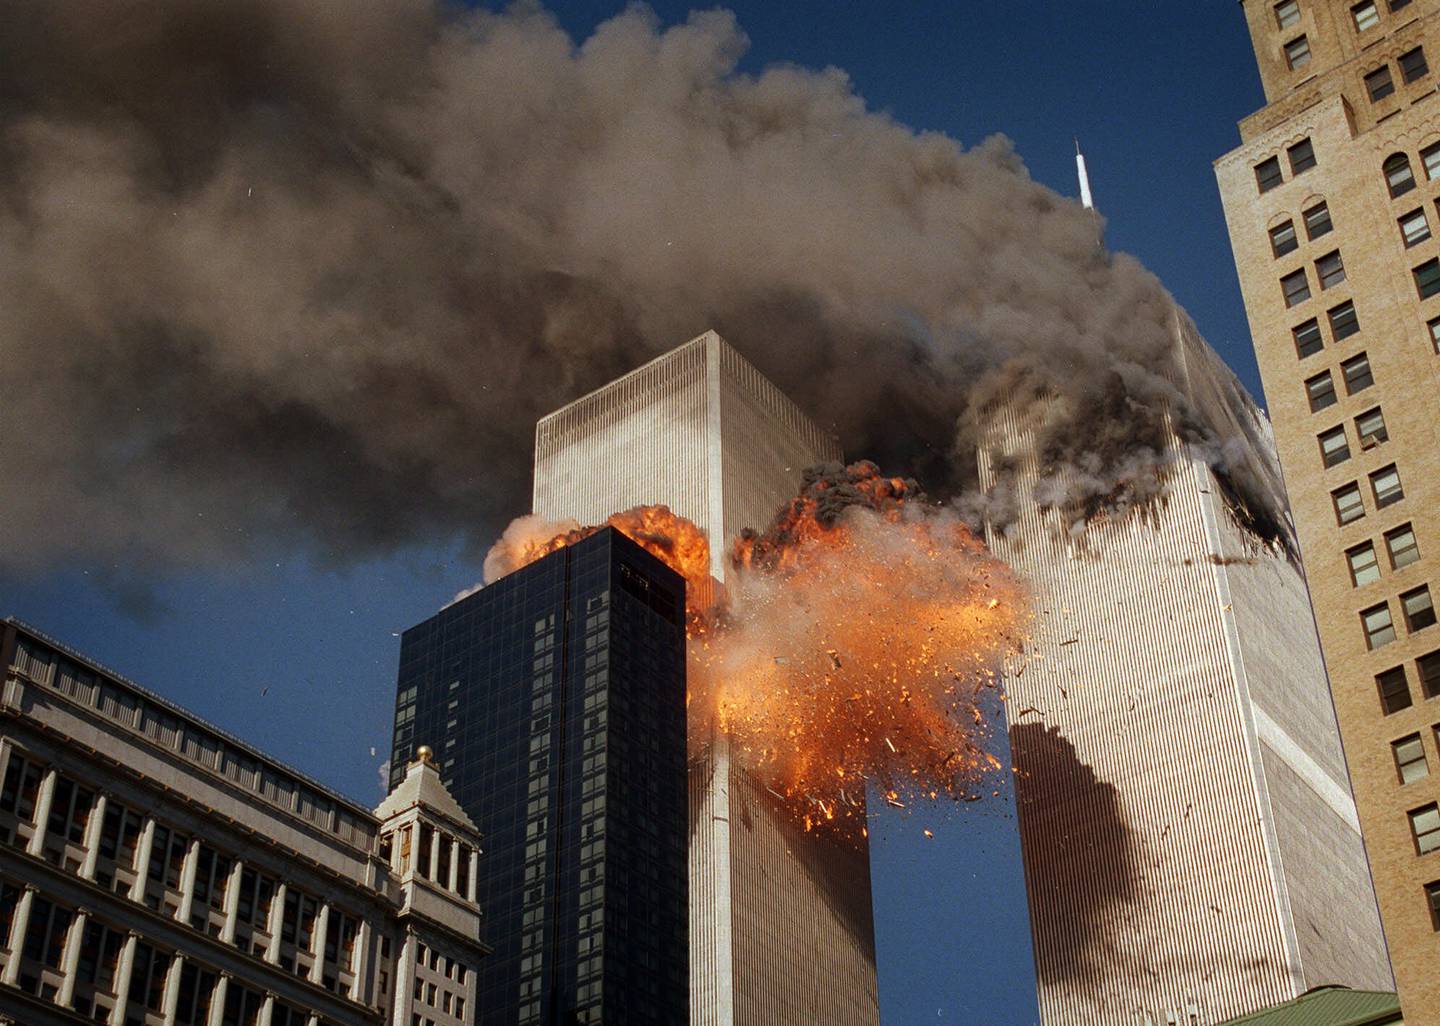 Smoke billows from one of the towers of the World Trade Center as flames and debris explode from the second tower, Tuesday, Sept. 11, 2001. (AP Photo/Chao Soi Cheong)